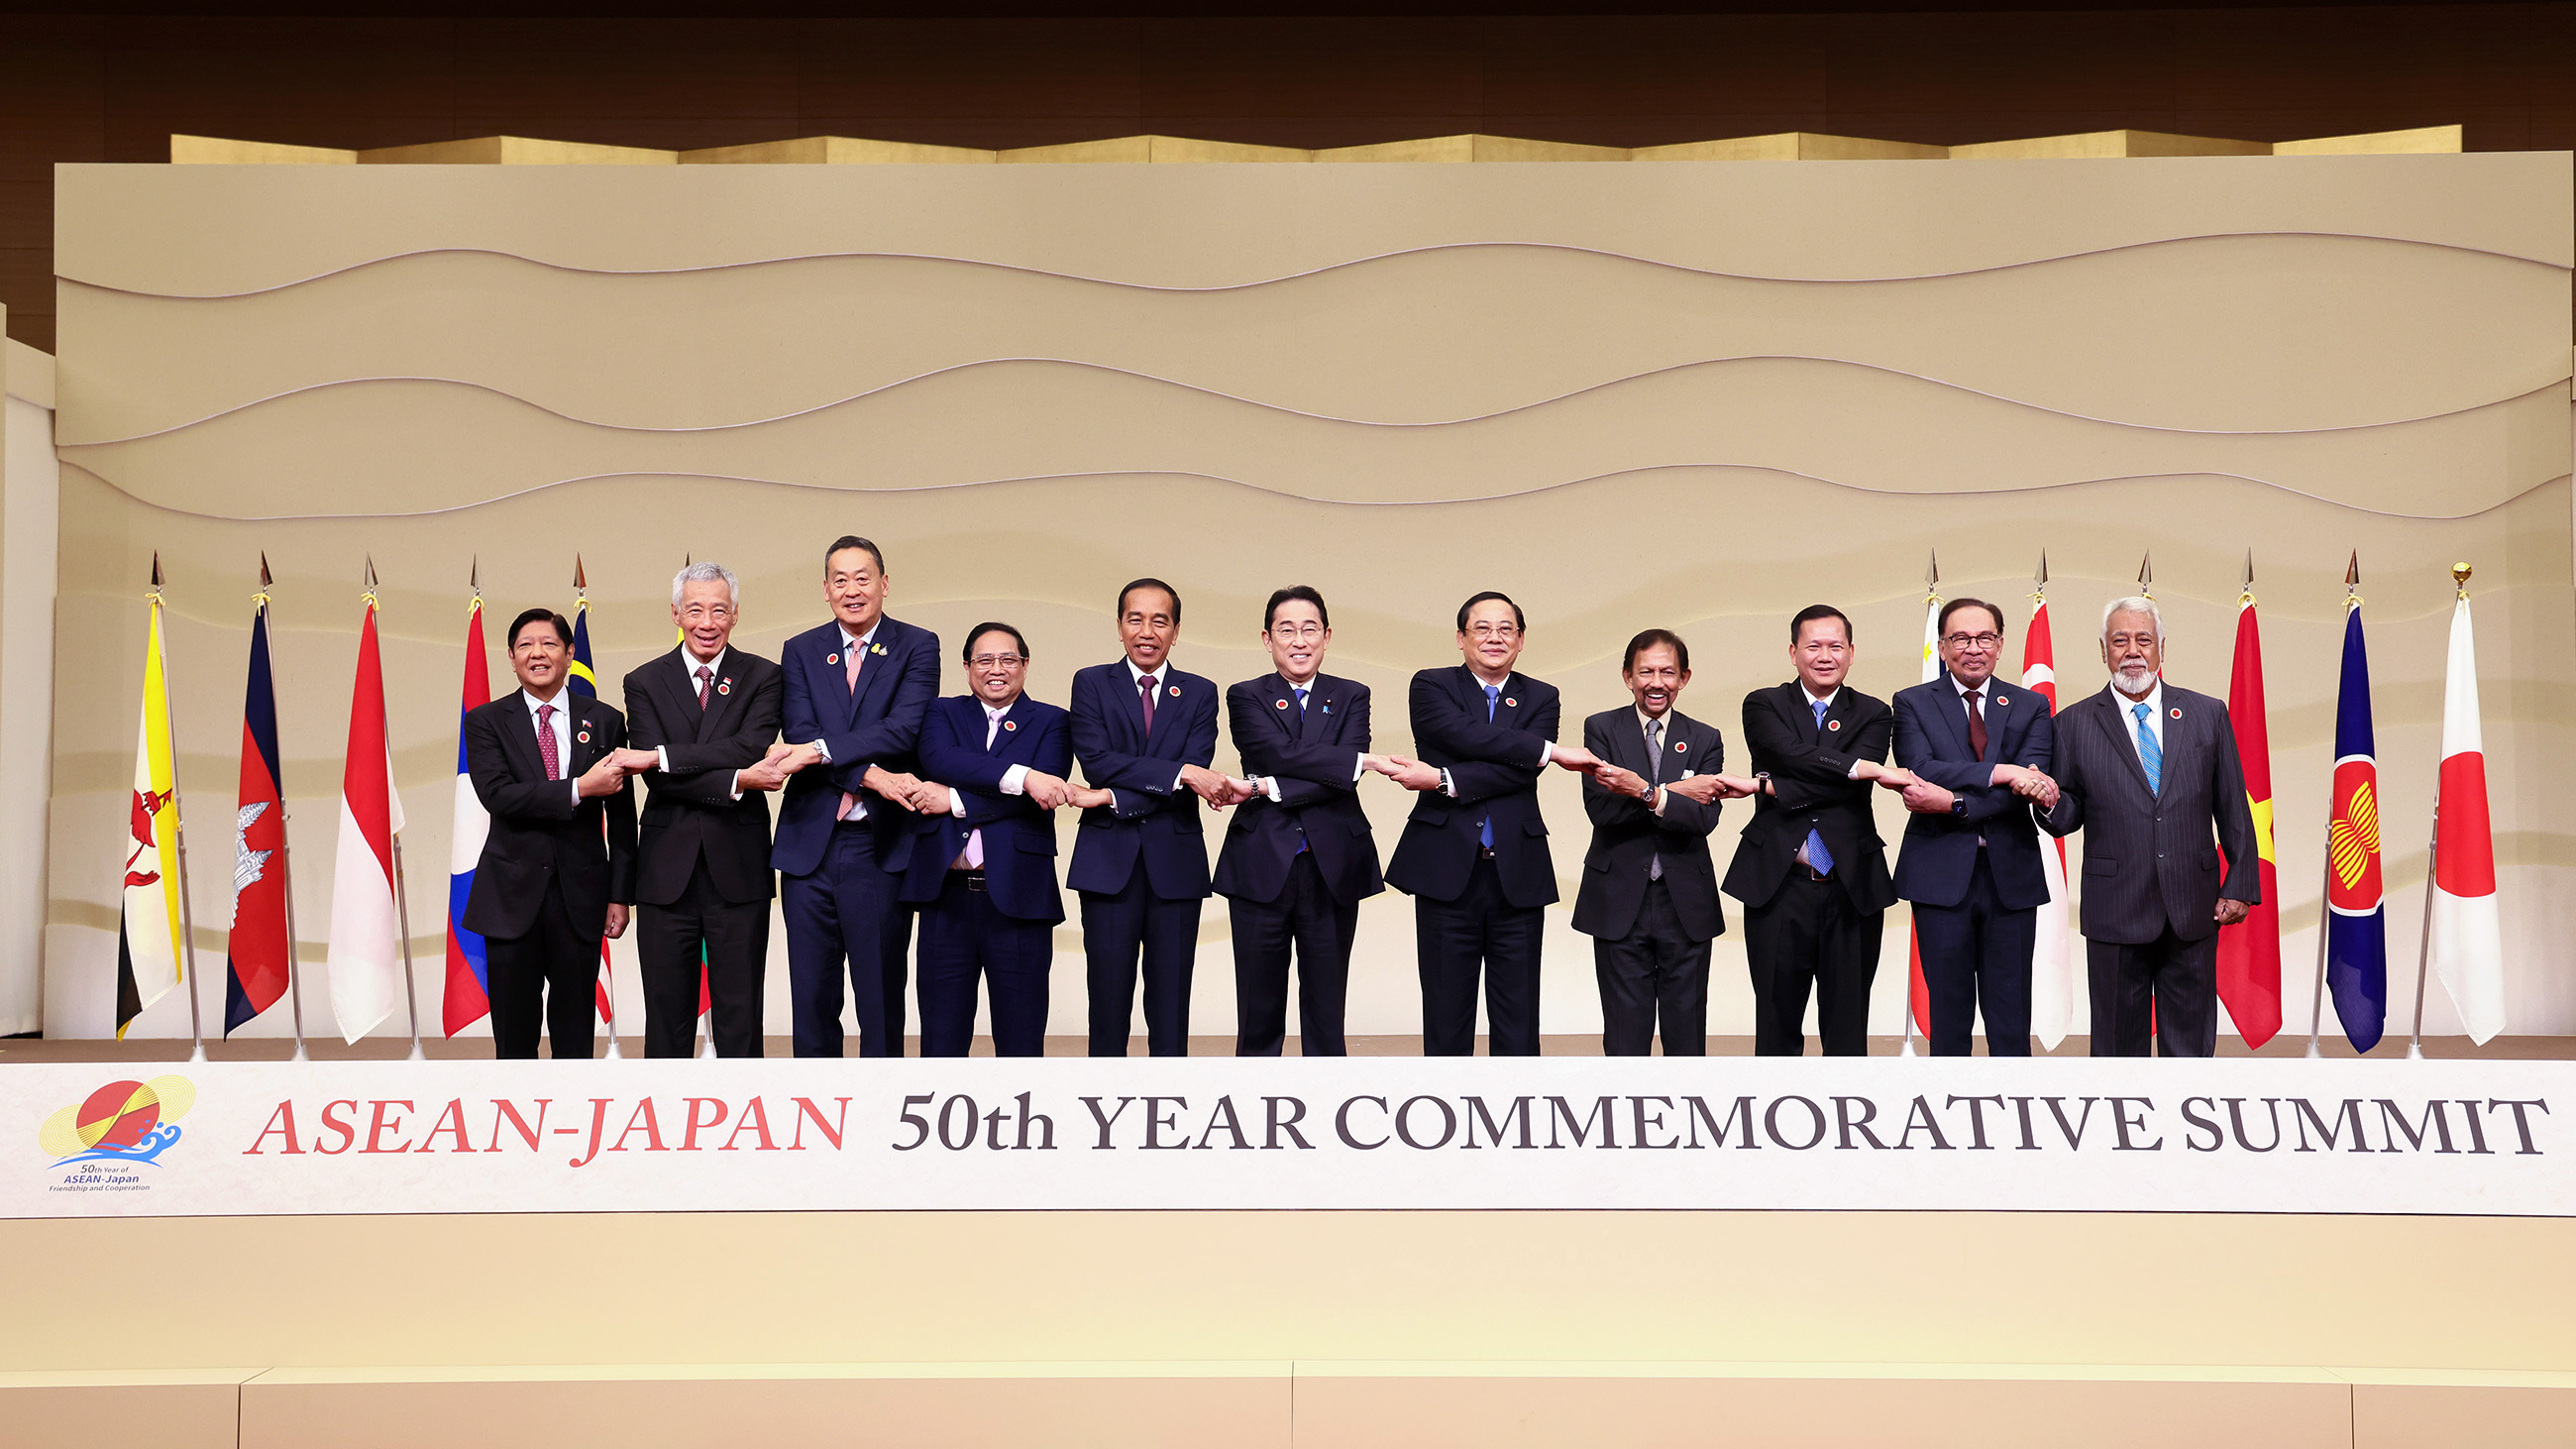 The Commemorative Summit for the 50th Year of ASEAN-Japan Friendship and Cooperation